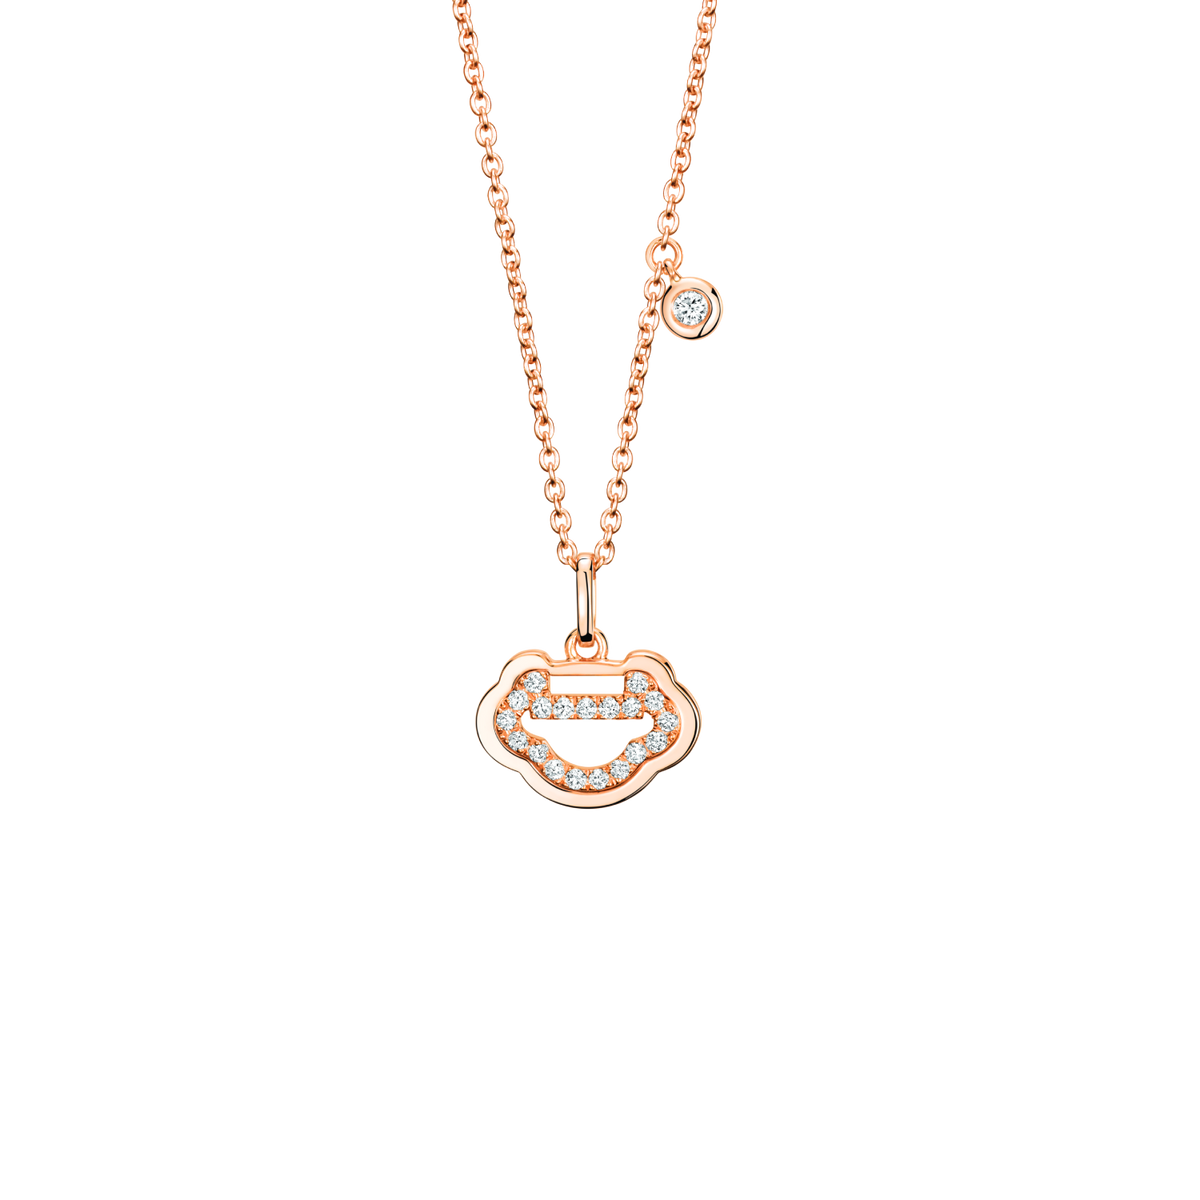 Petite Yu Yi necklace in 18K rose gold with diamonds